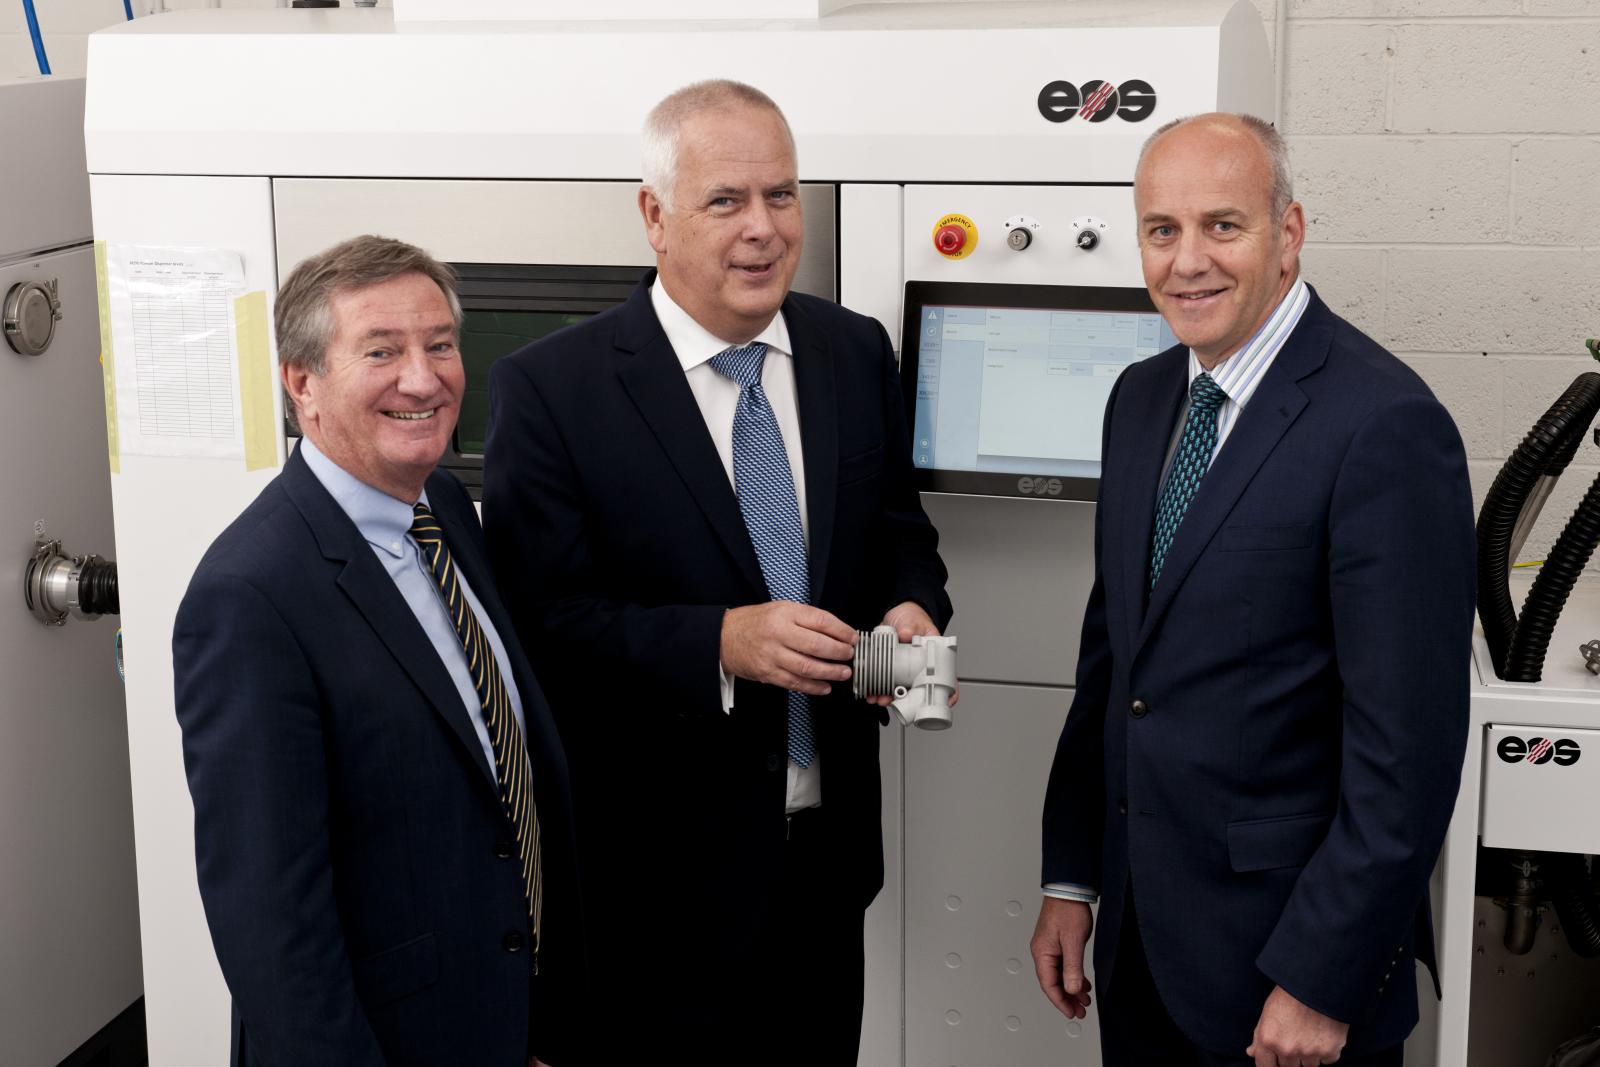 Media Name: bill_montogomery_of_invest_ni_and_dr_lelsie_orr_of_ads_northern_ireland_join_tom_walls_centre_of_laser_prototypes_europe_lpe.jpg